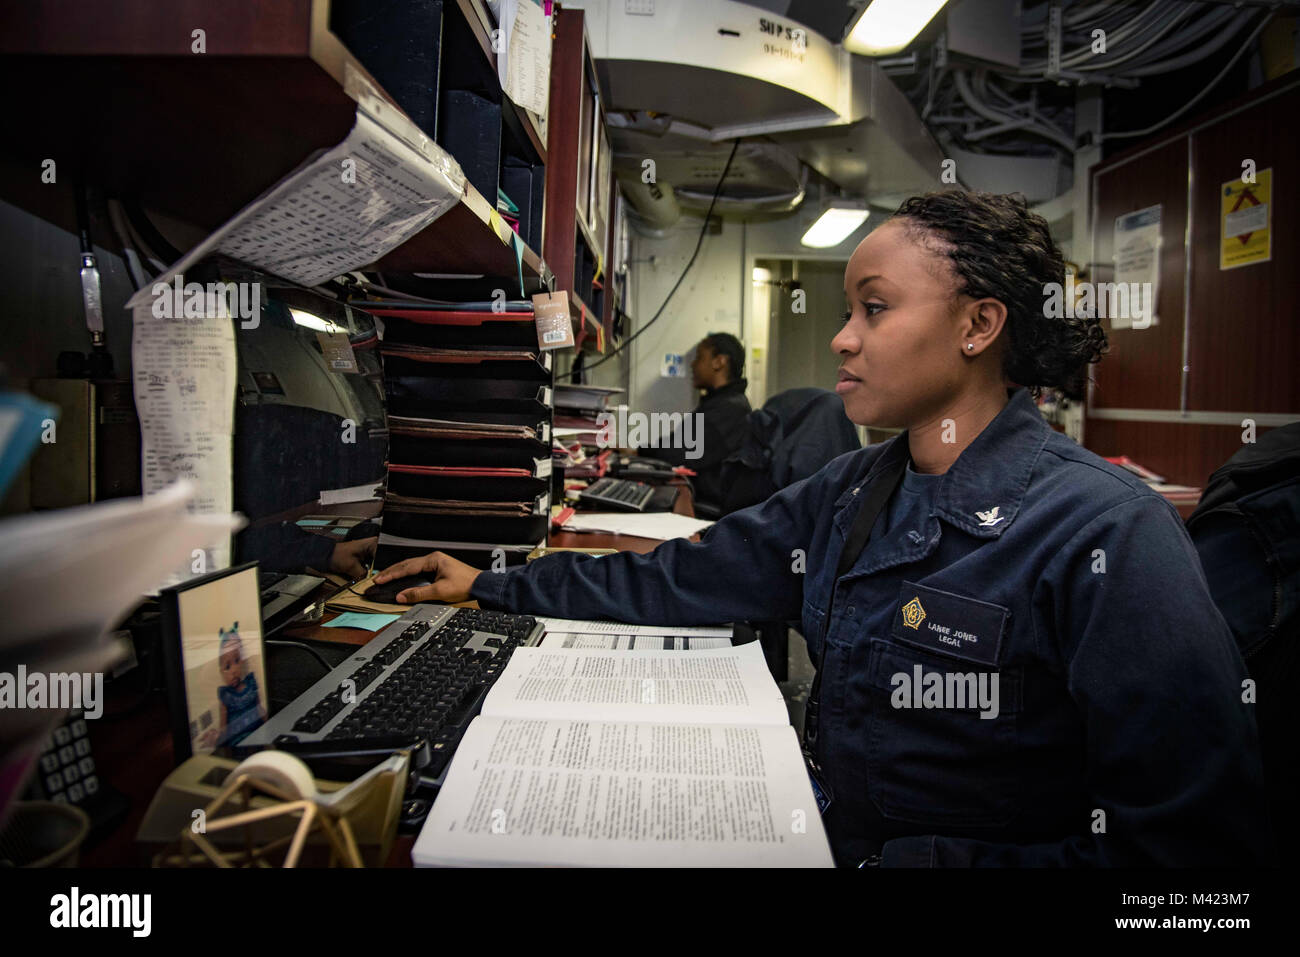 180208-N-IE397-004    PORTSMOUTH (Feb. 8, 2018) Legalman 3rd Class Lanee Jones, from Atlanta, drafts legal correspondence in the legal office aboard the aircraft carrier USS Dwight D. Eisenhower (CVN 69) (Ike). Ike is undergoing a Planned Incremental Availability (PIA) at Norfolk Naval Shipyard during the maintenance phase of the Optimized Fleet Response Plan (OFRP). (U.S. Navy photo by Mass Communication Specialist 3rd Class Christopher A. Michaels) Stock Photo